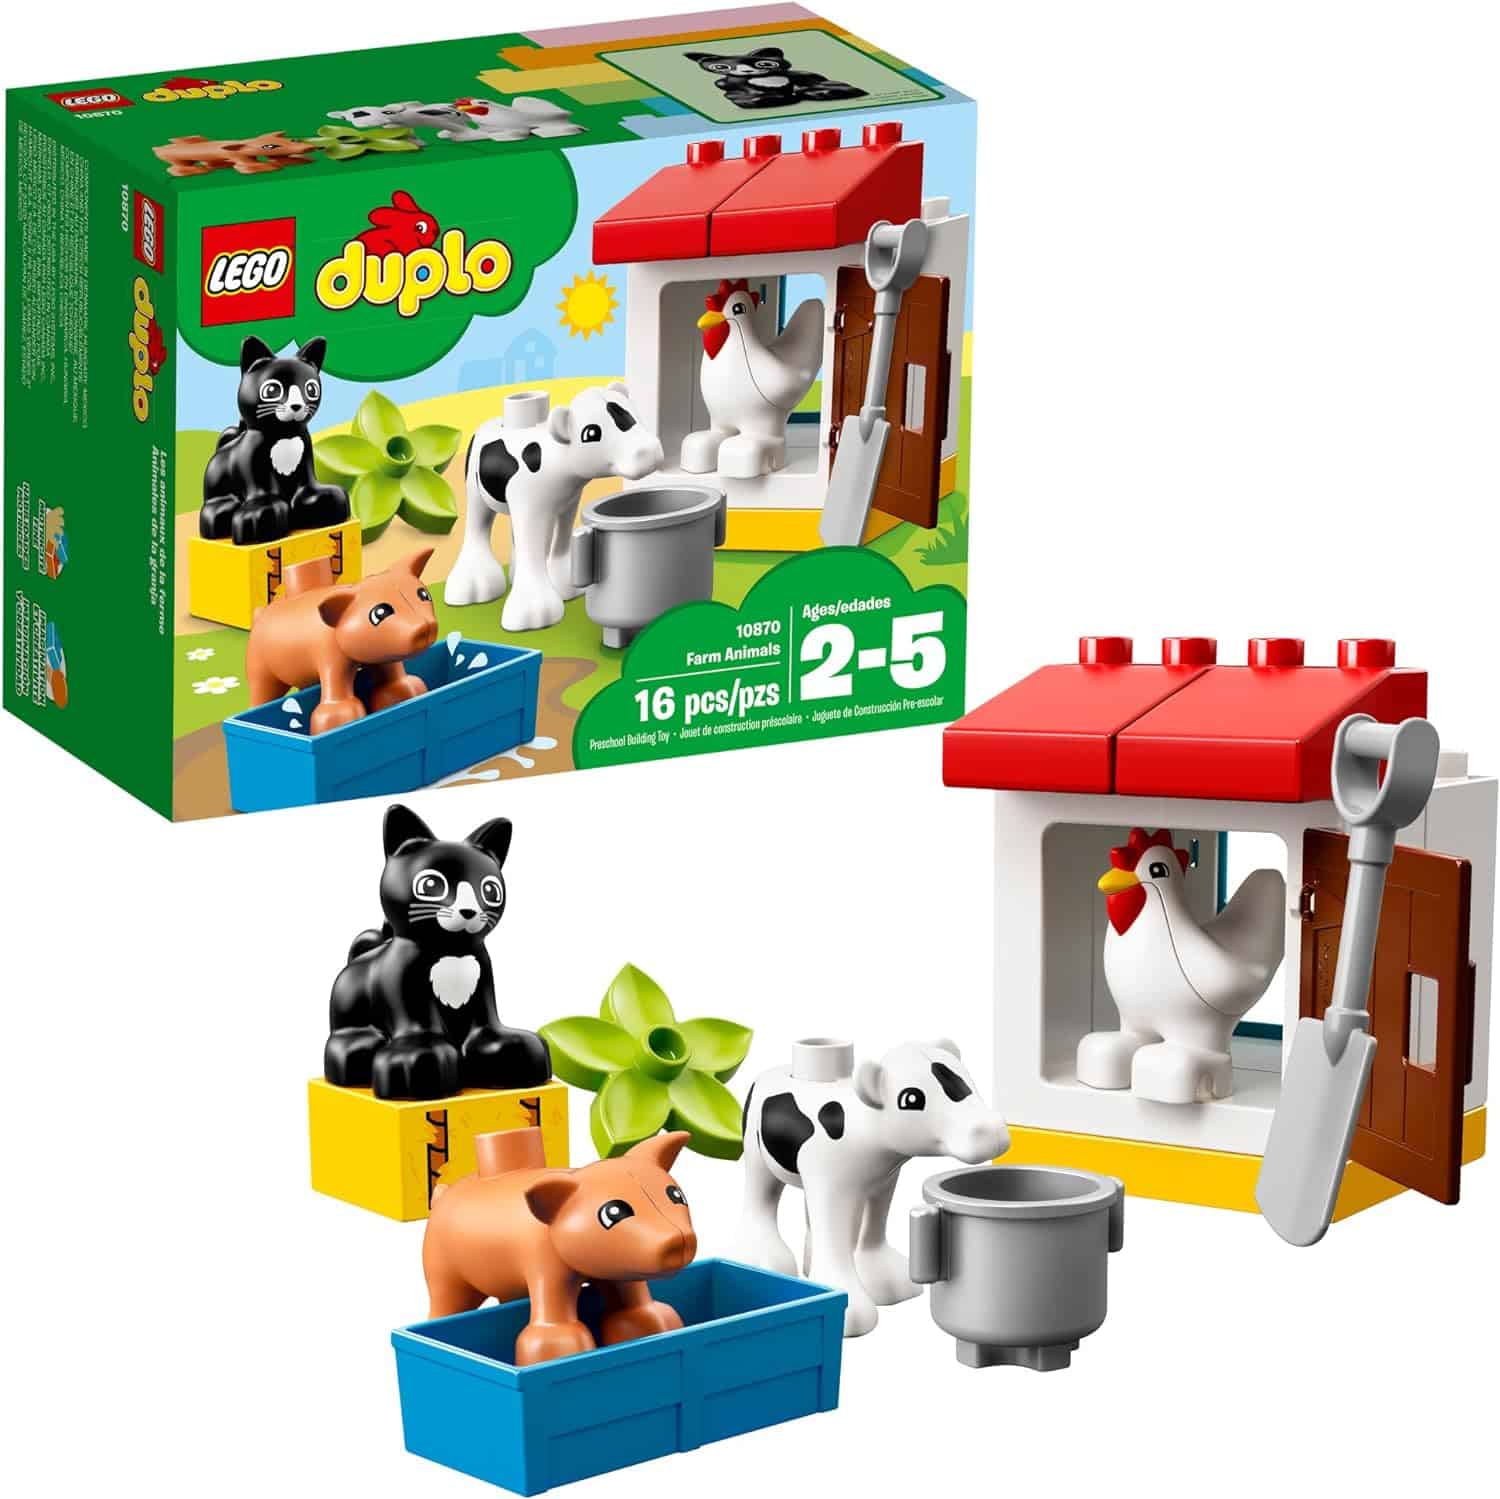 Farm animal LEGO Duplo set for kids- Ages 2 to 5 years: Best LEGO Duplo Sets